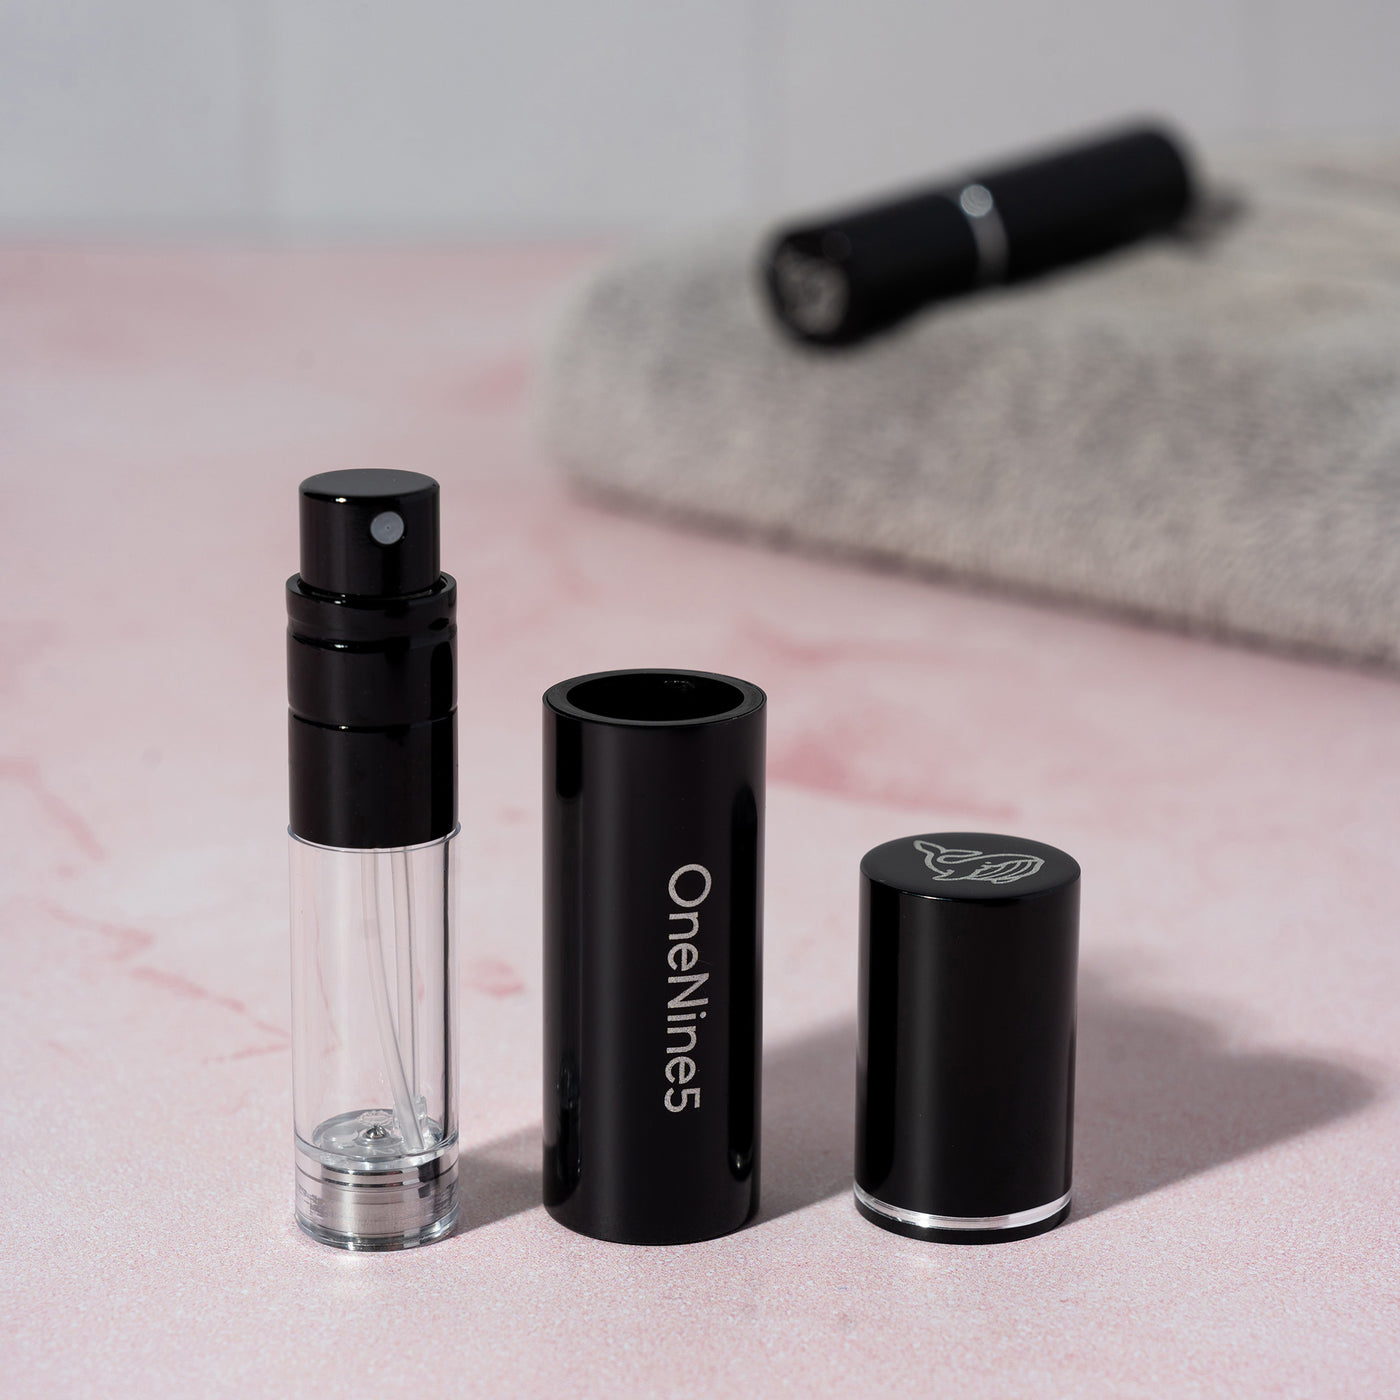 The 3 components of the black OneNine5 refillable fragrance bottle - the images shows the pump, case and magentic lid in line